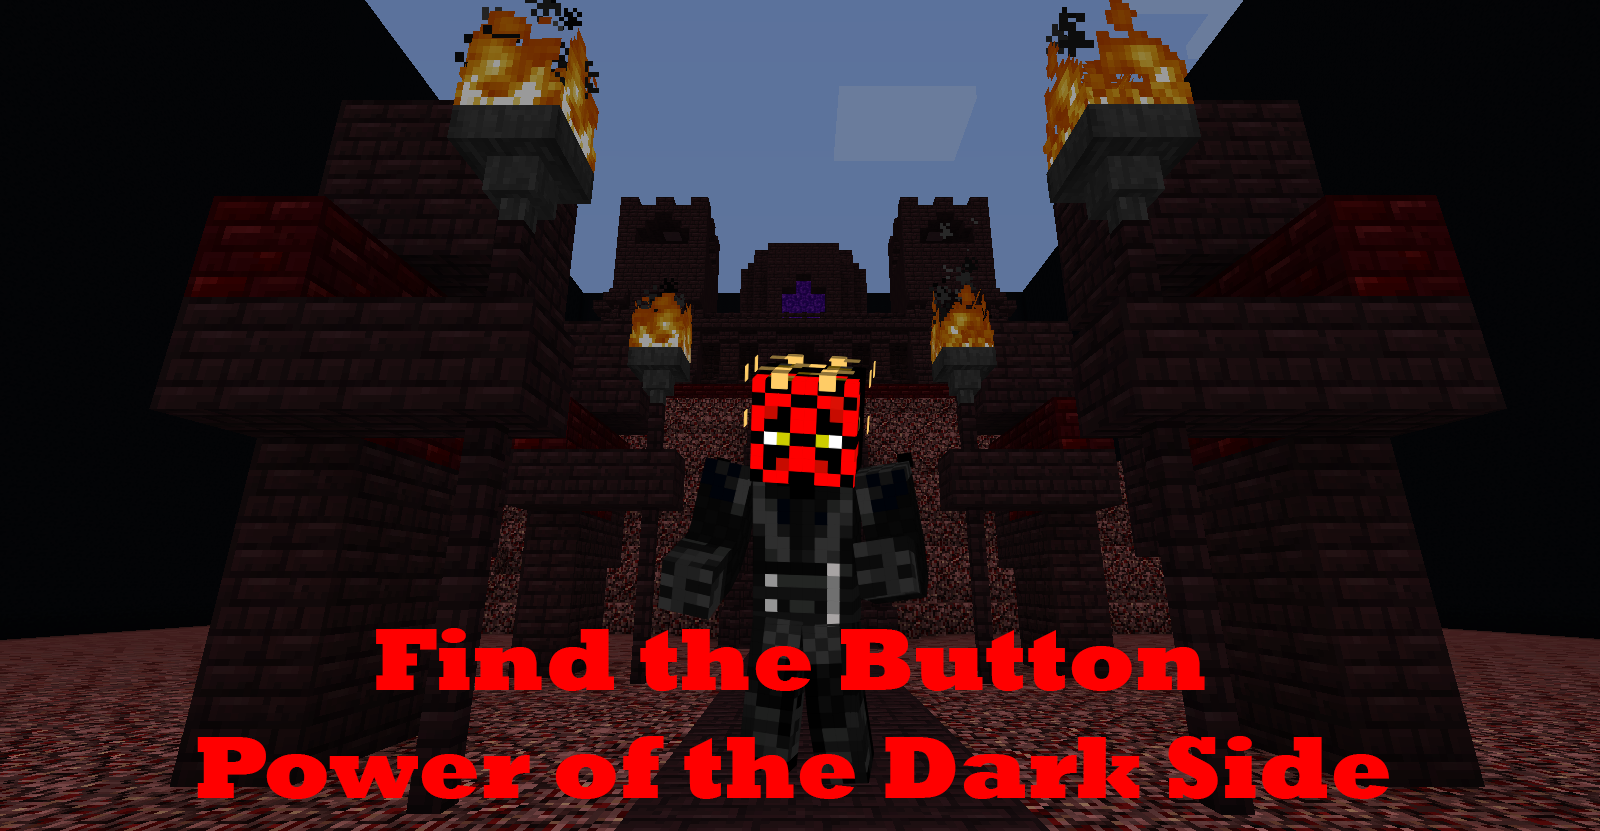 Download Find the Button: Power of the Dark Side for Minecraft 1.12.2